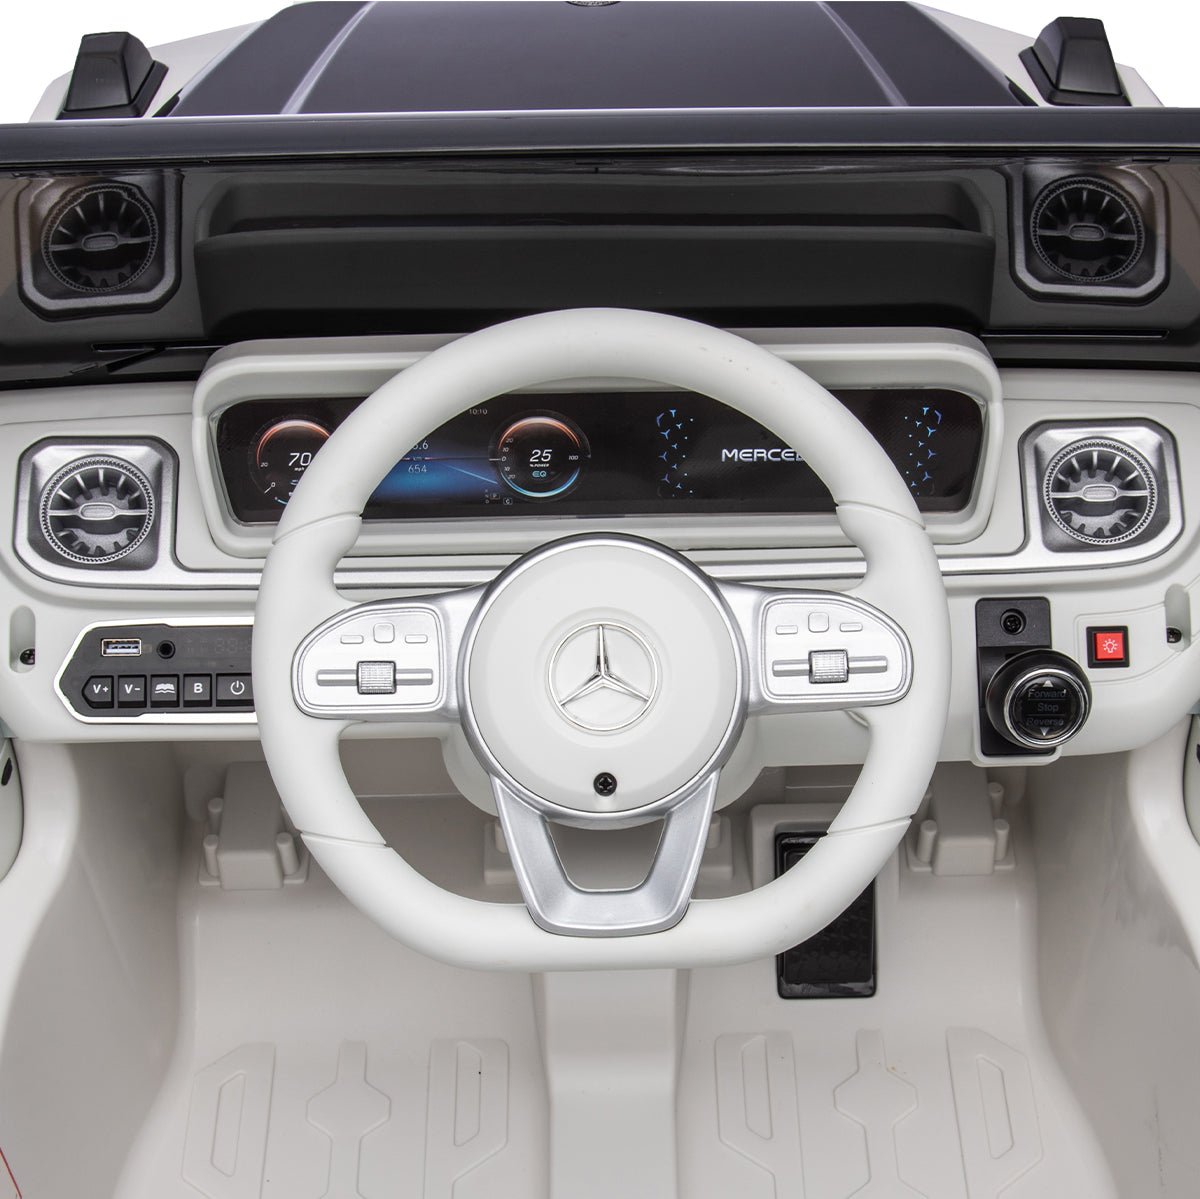 Mercedes Benz EQG 12V Electric Ride On Jeep